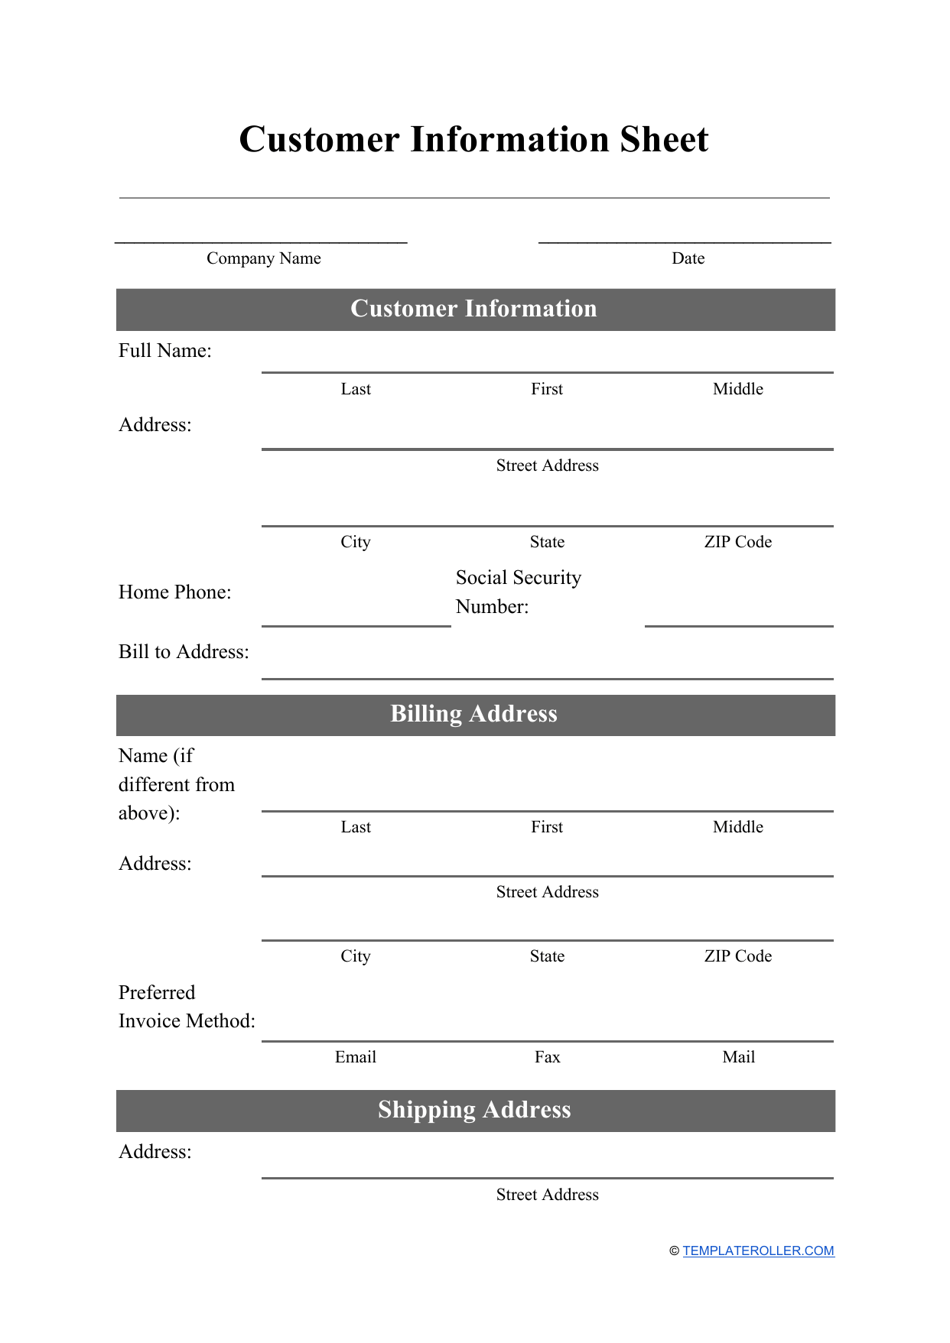 Customer Information Sheet Template Fill Out, Sign Online and